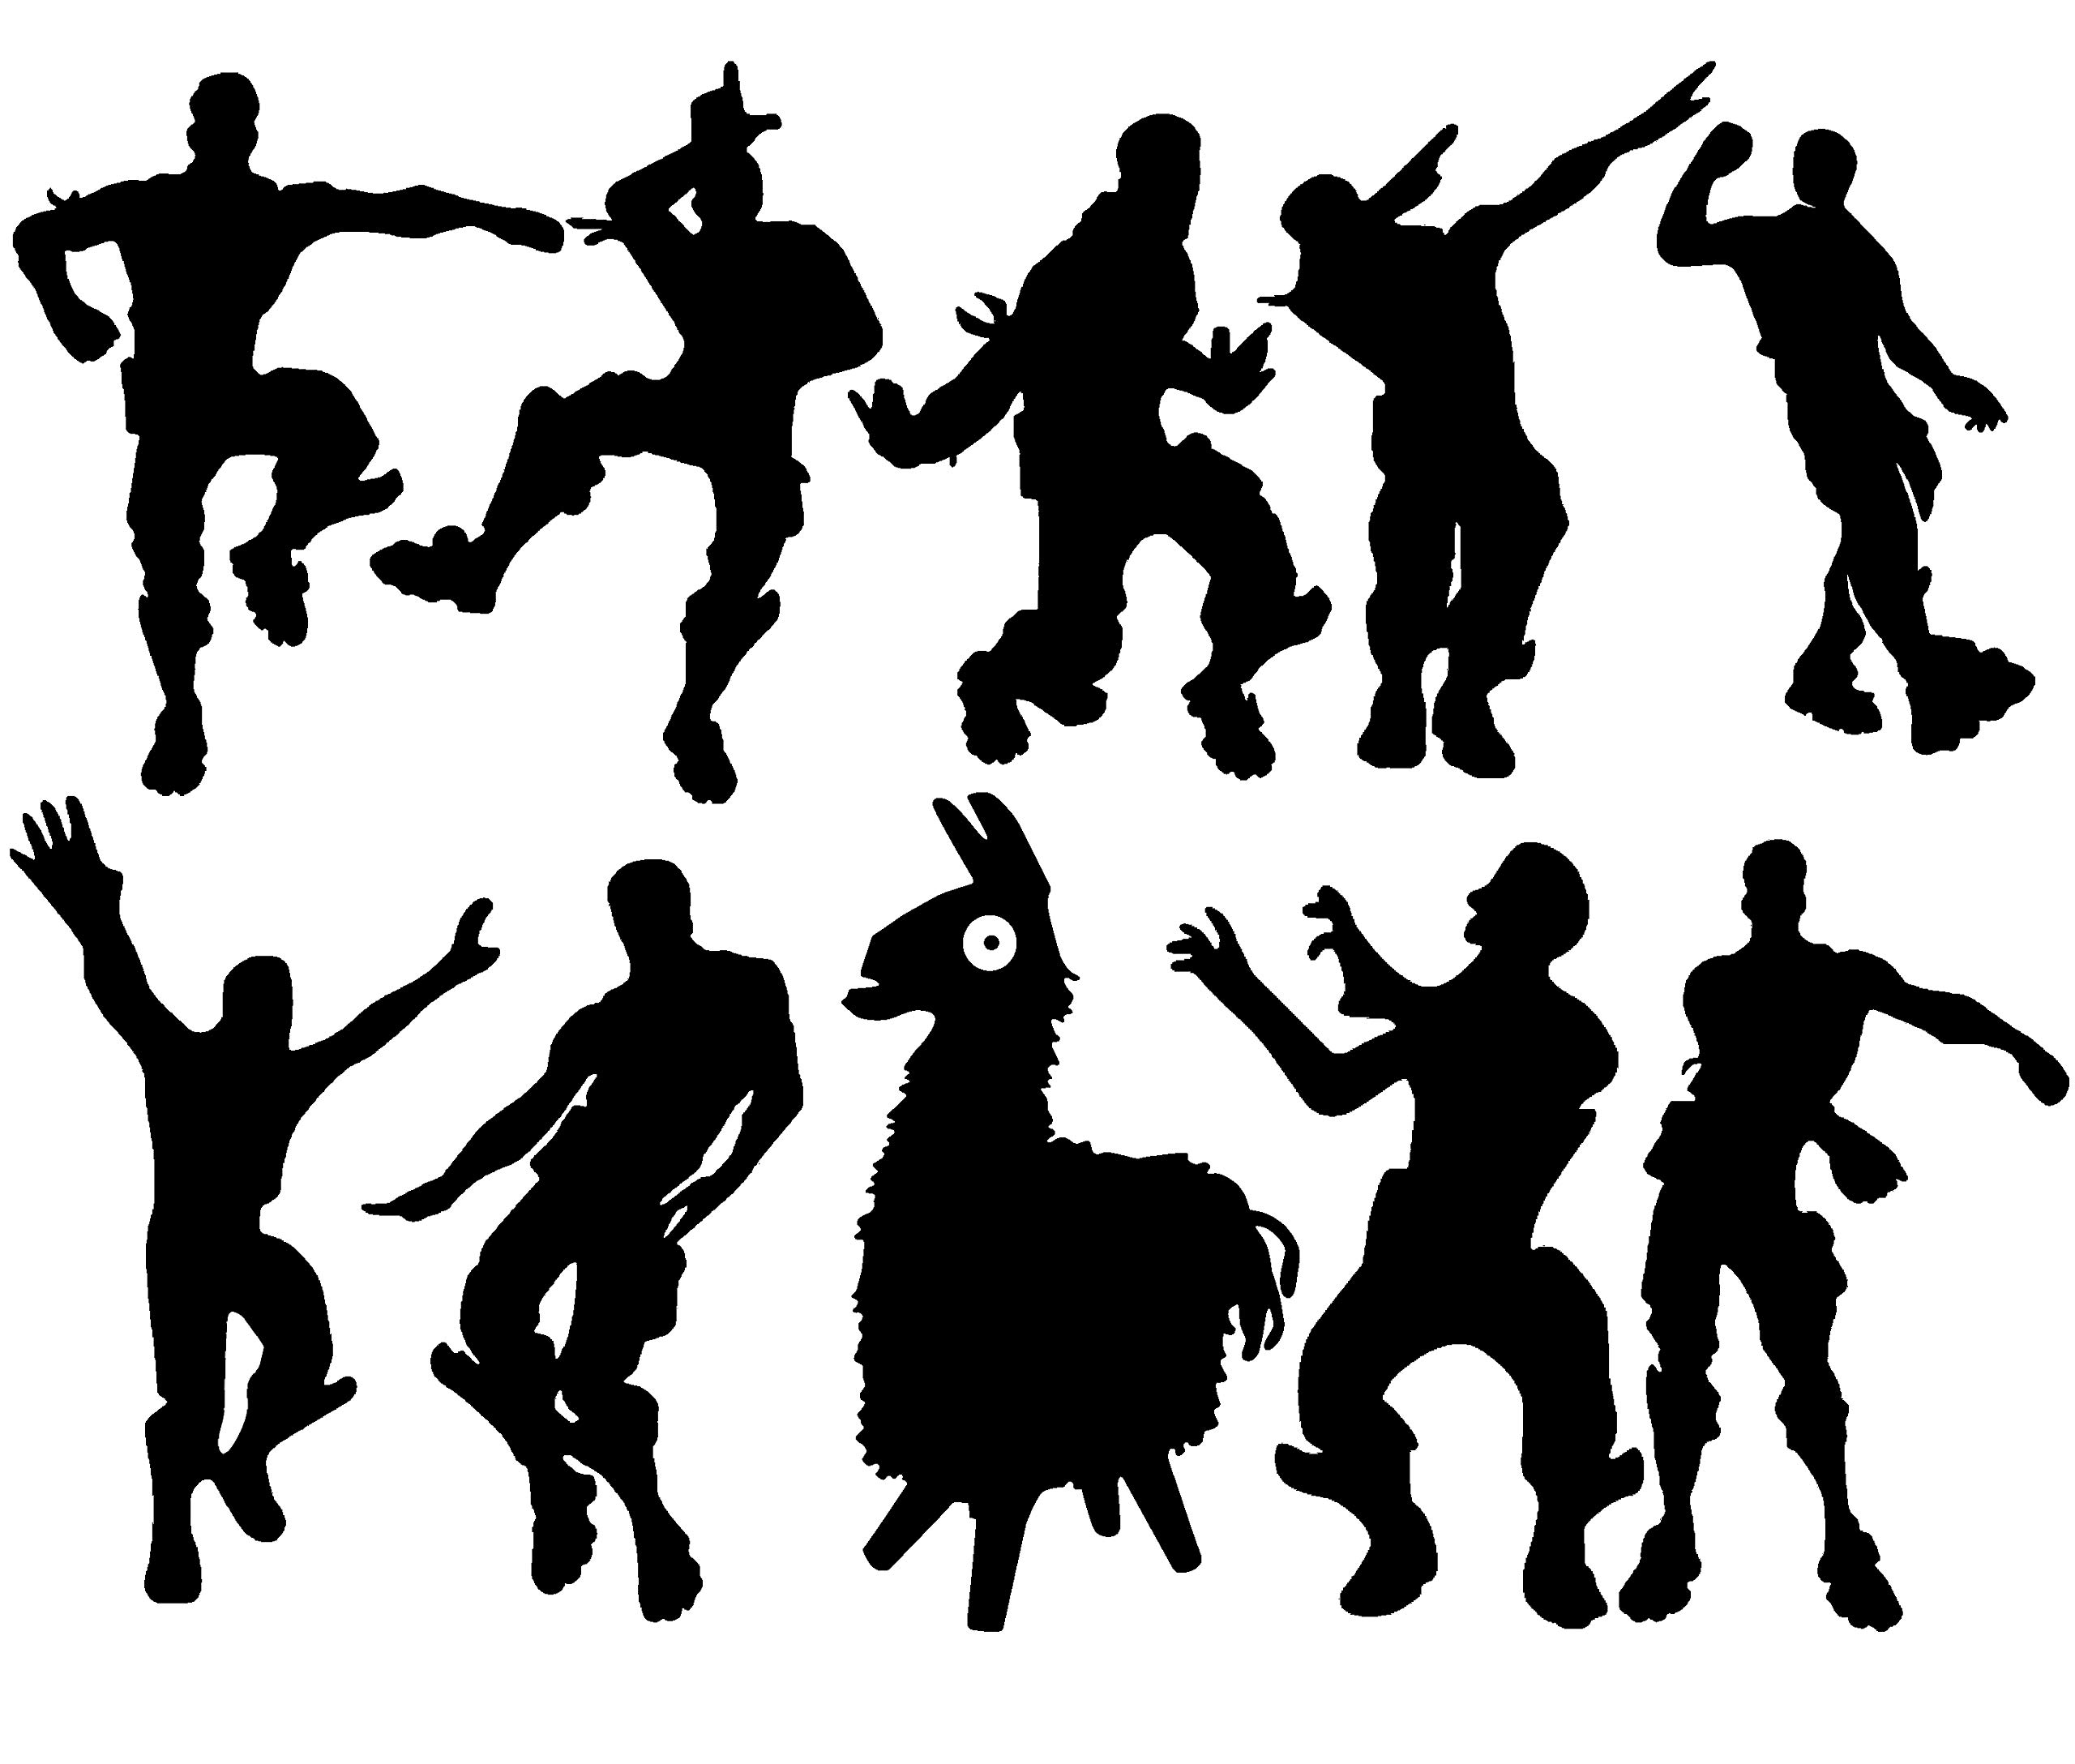 Video Game Wall Decal Wall Sticker Poster Floss Dancing Decal Game Room Decor Peel & Stick Game Decal Baby Bedroom Home Decor Gaming Stickers (34.6" x 23.6") (Black)